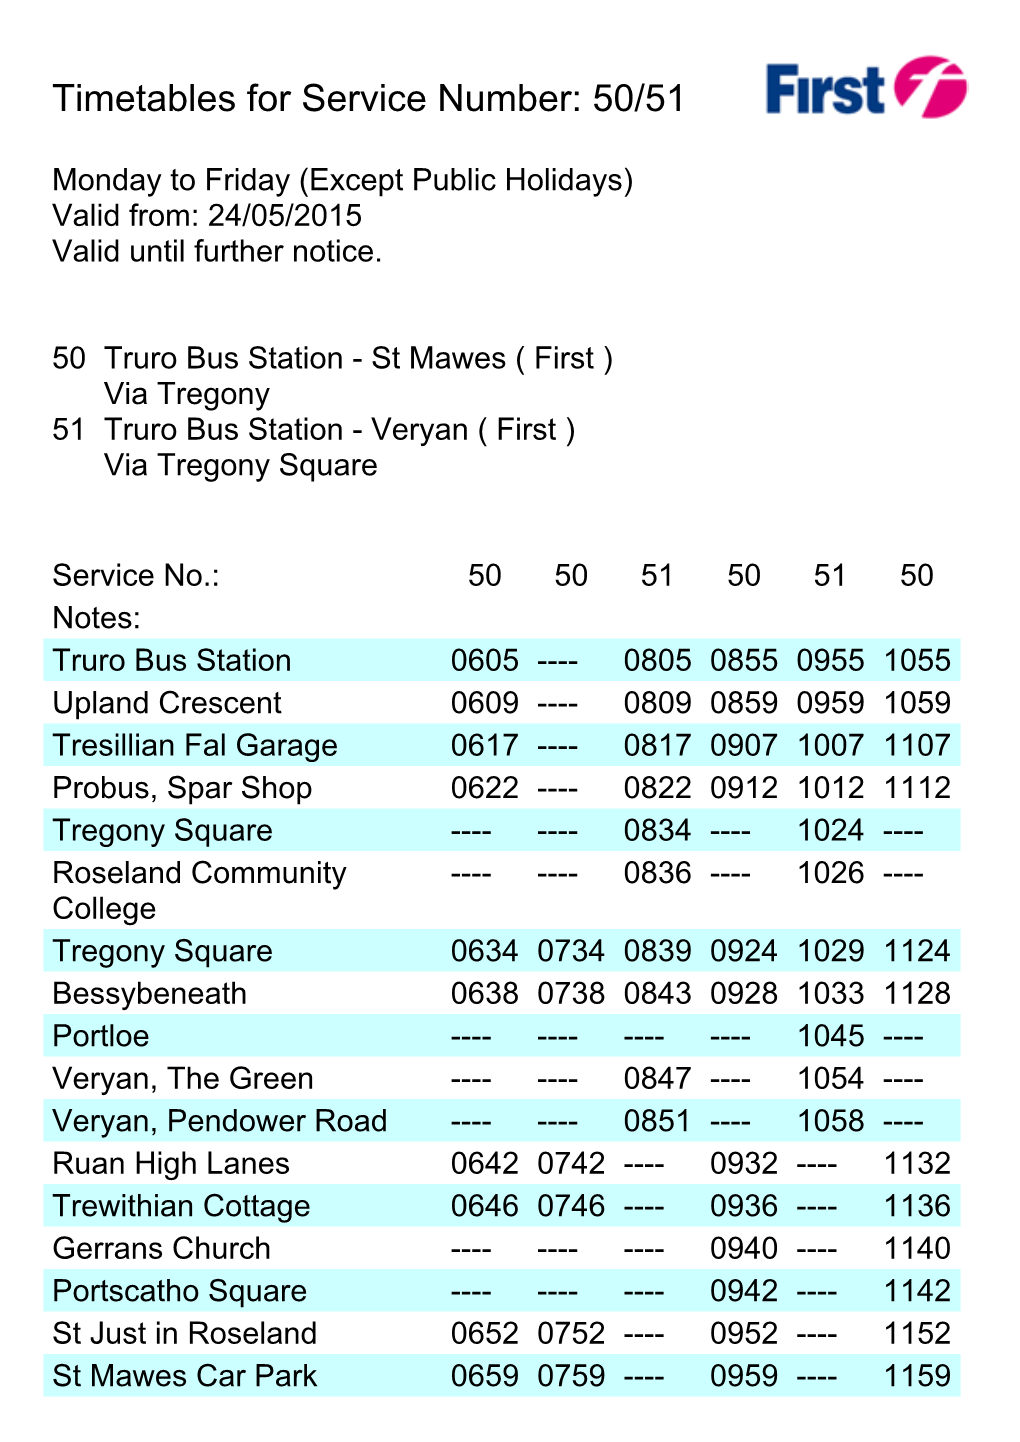 Timetables for Service Number: 50/51